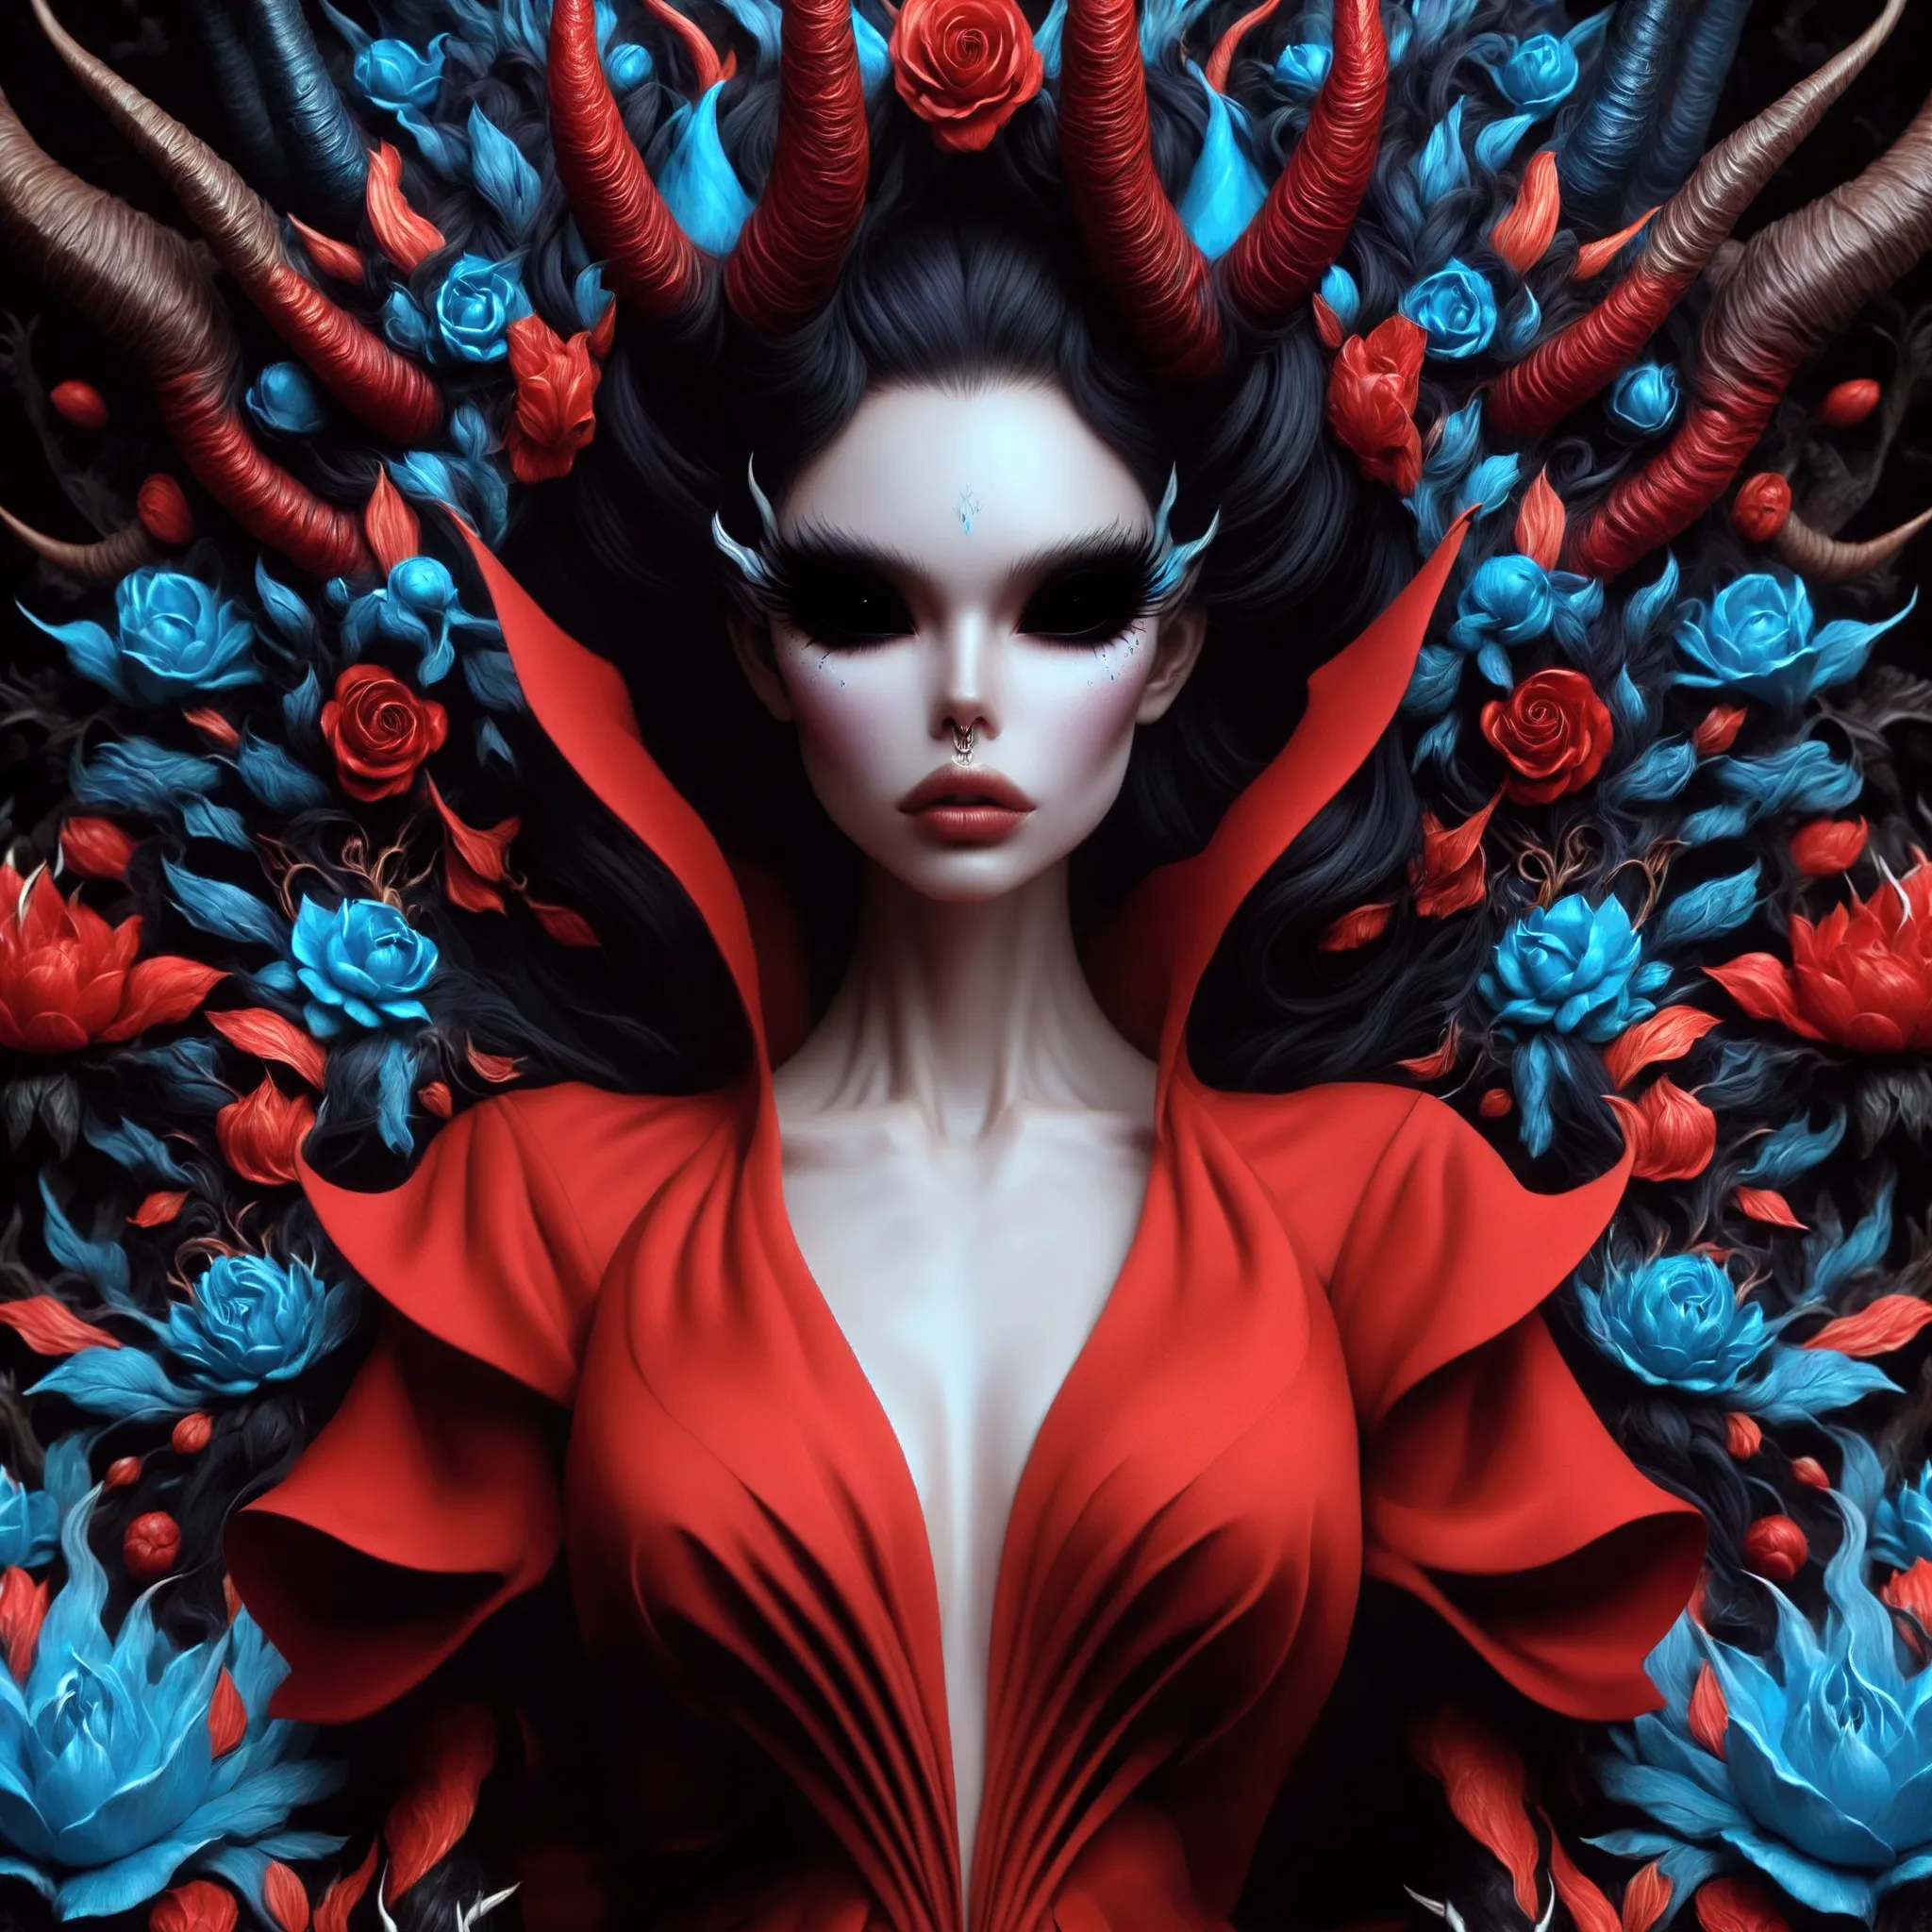 a close up of a woman in a red dress with a large flowered headpiece, beautiful elegant demon queen, inspired by Hedi Xandt, col...